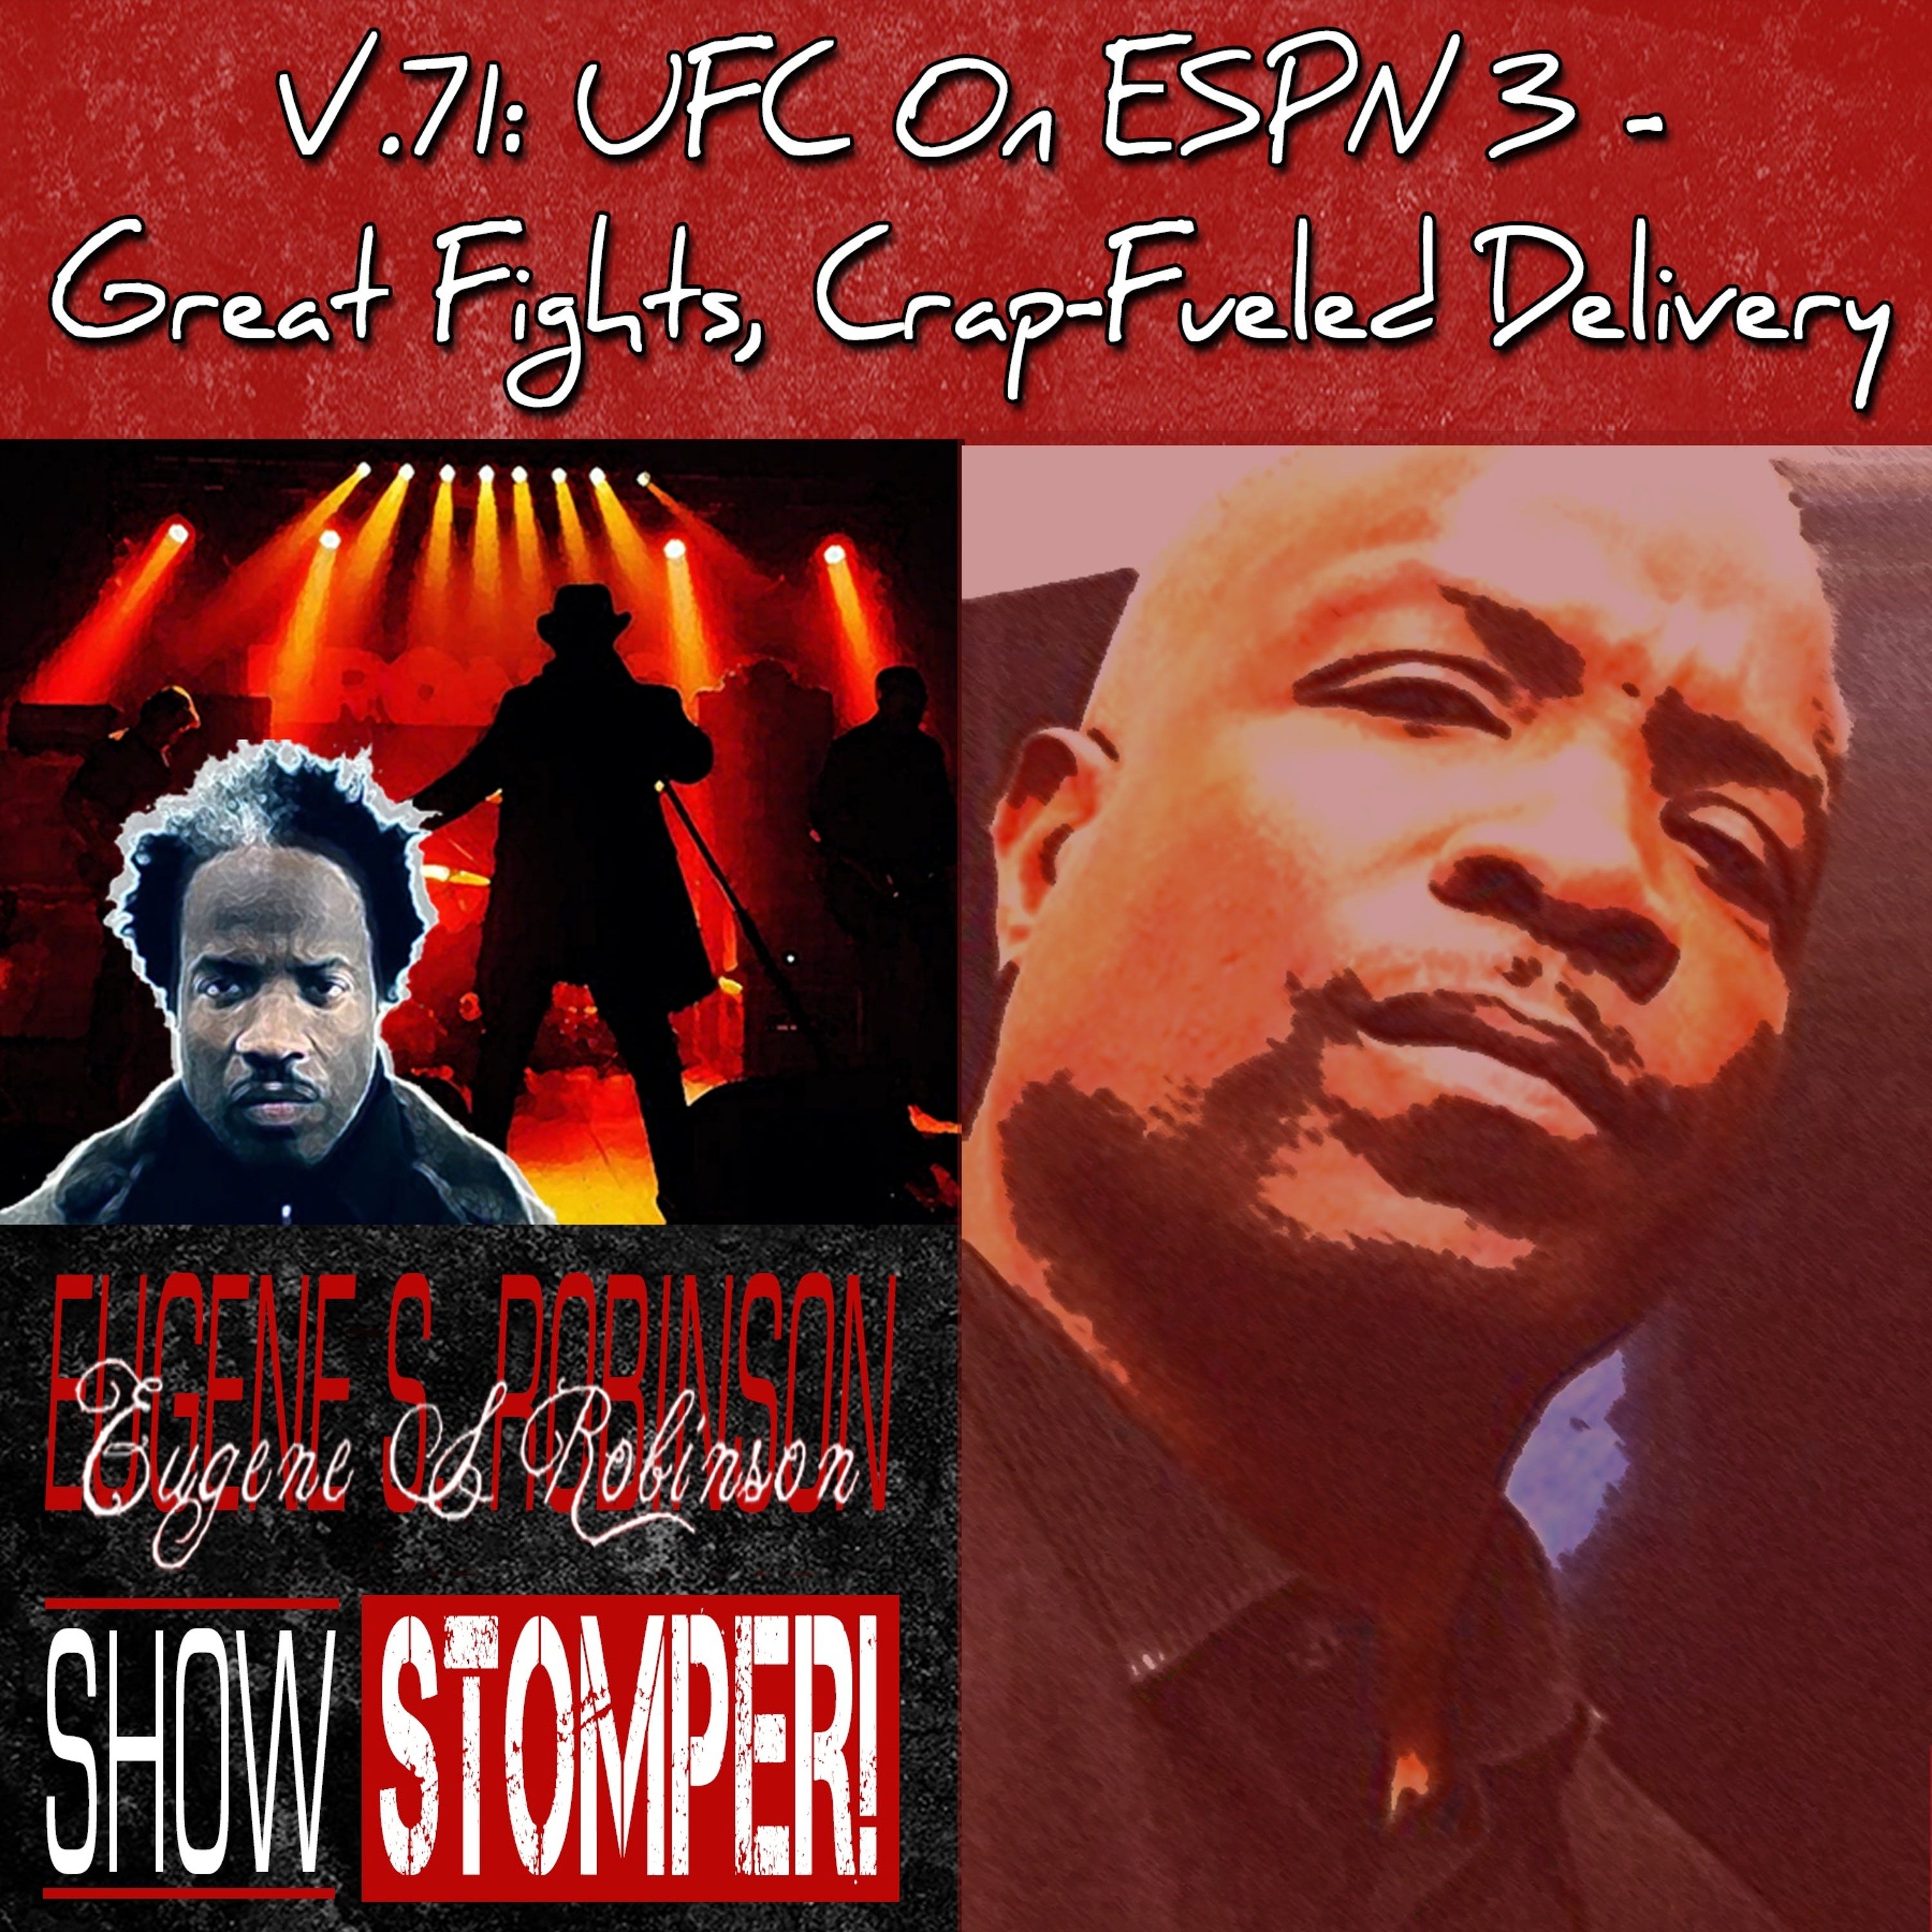 V.71: UFC On ESPN 3 - Great Fights, Crap-Fueled Delivery On The Eugene S. Robinson Show Stomper!